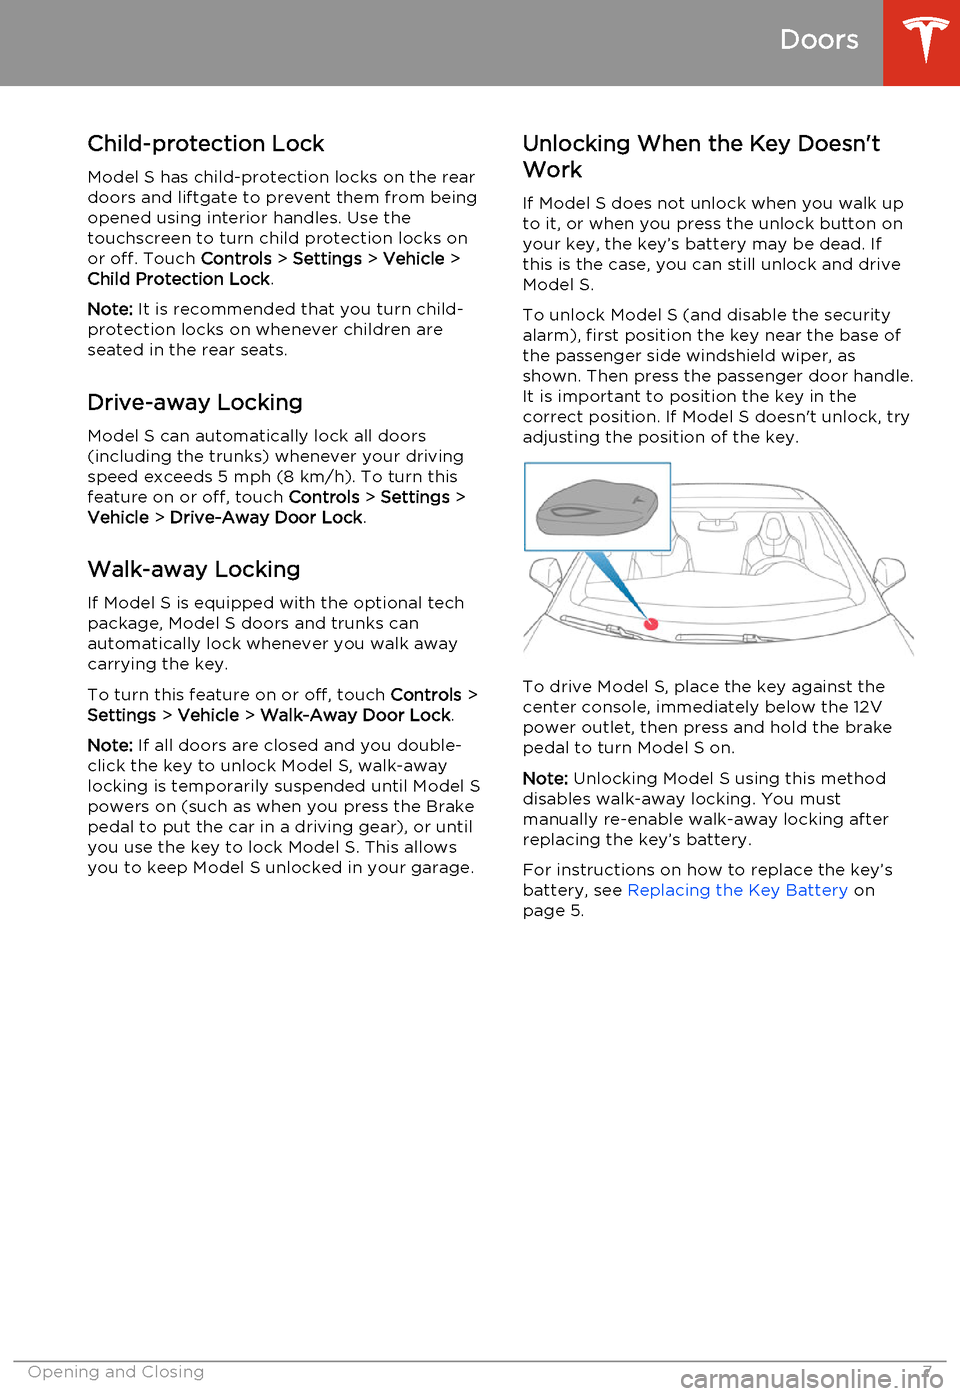 TESLA MODEL S 2014  Owners manual (North America) Child-protection LockModel S has child-protection locks on the rear
doors and liftgate to prevent them from being
opened using interior handles. Use the
touchscreen to turn child protection locks on o